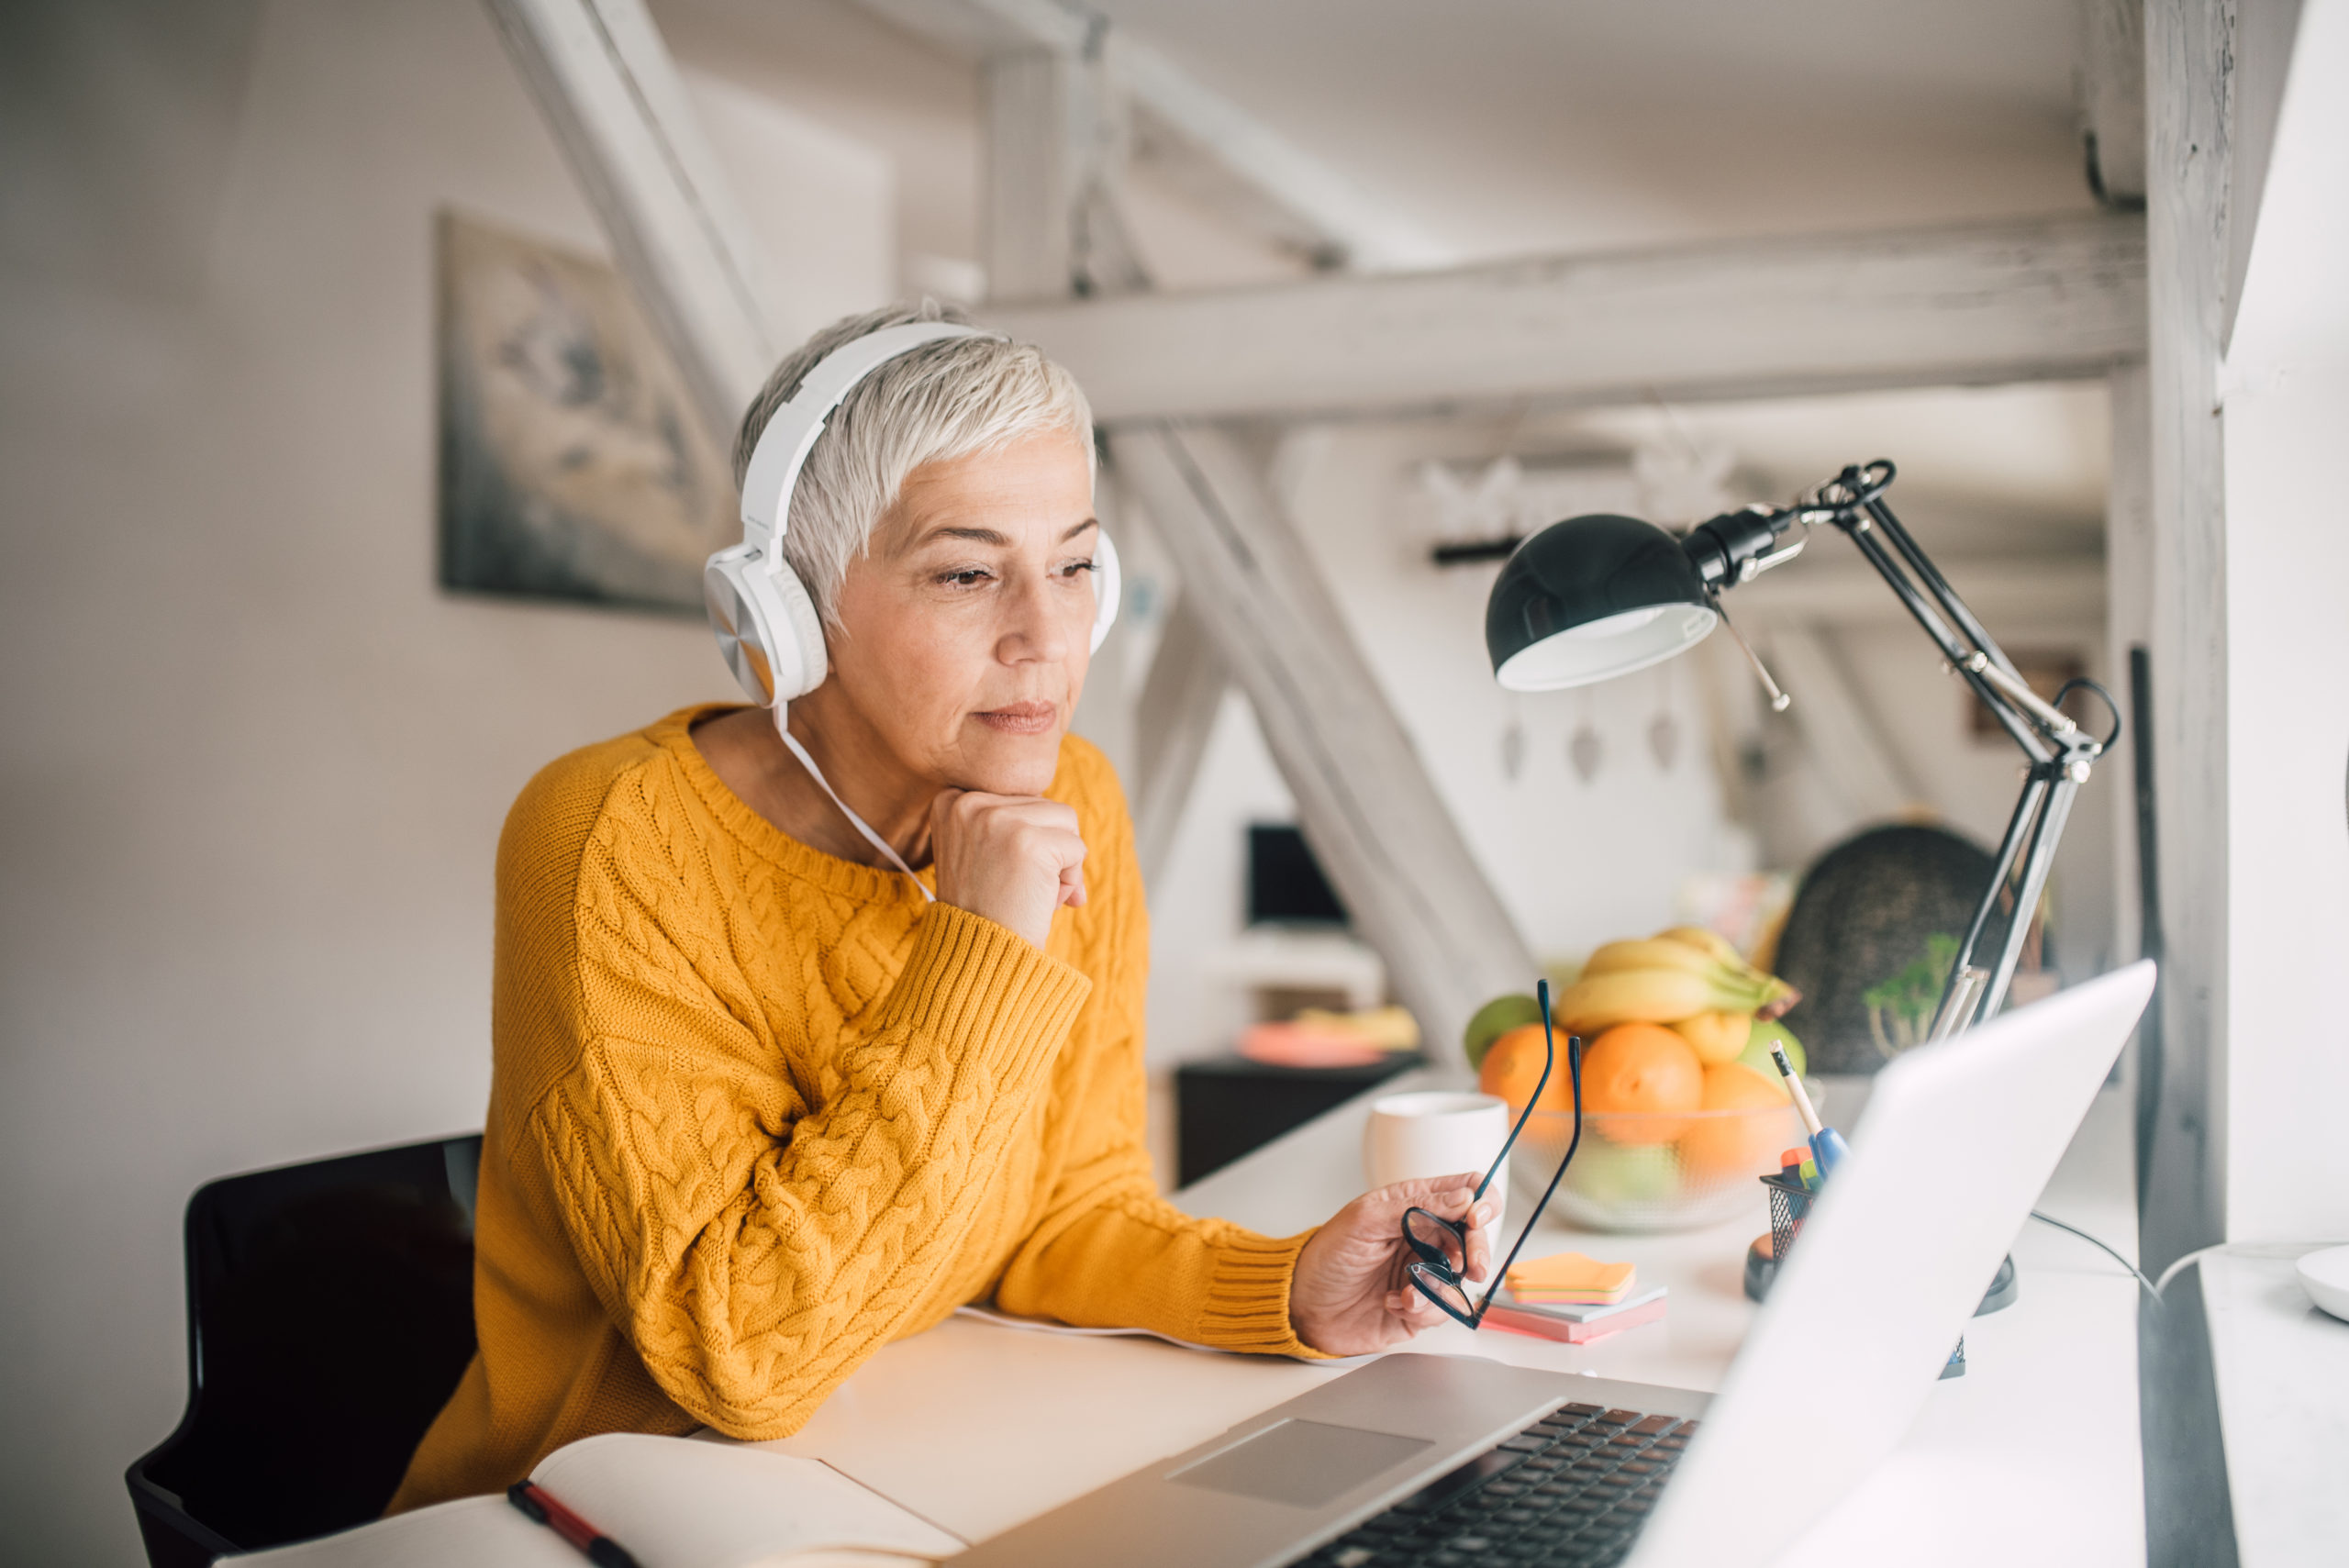 Woman working from home with headphones on.